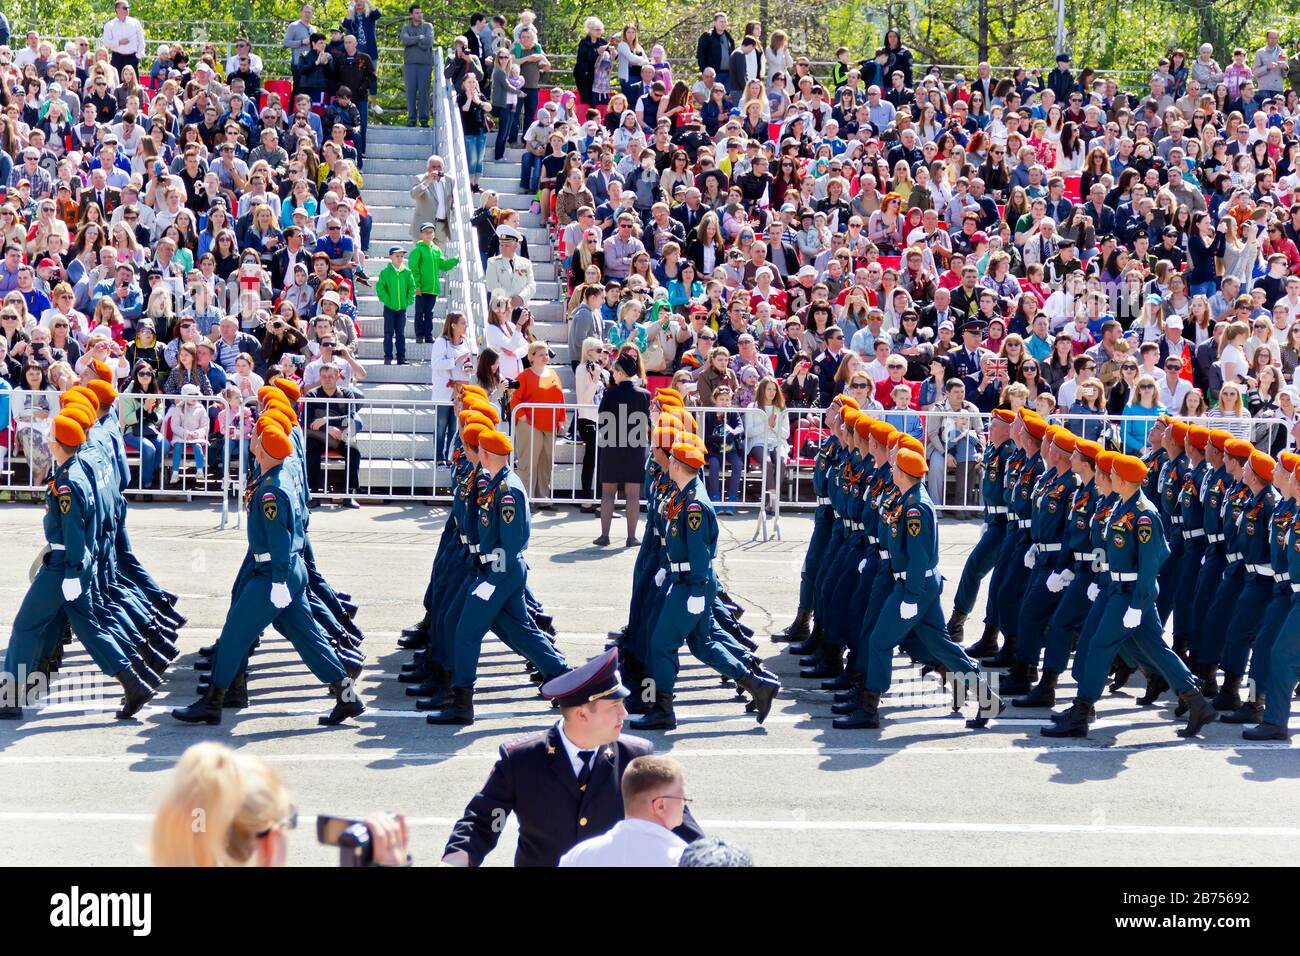 SAMARA, RUSSIA - MAY 9, 2016: Russian soldiers march at the parade on annual Victory Day, May, 9, 2016 in Samara, Russia. Stock Photo